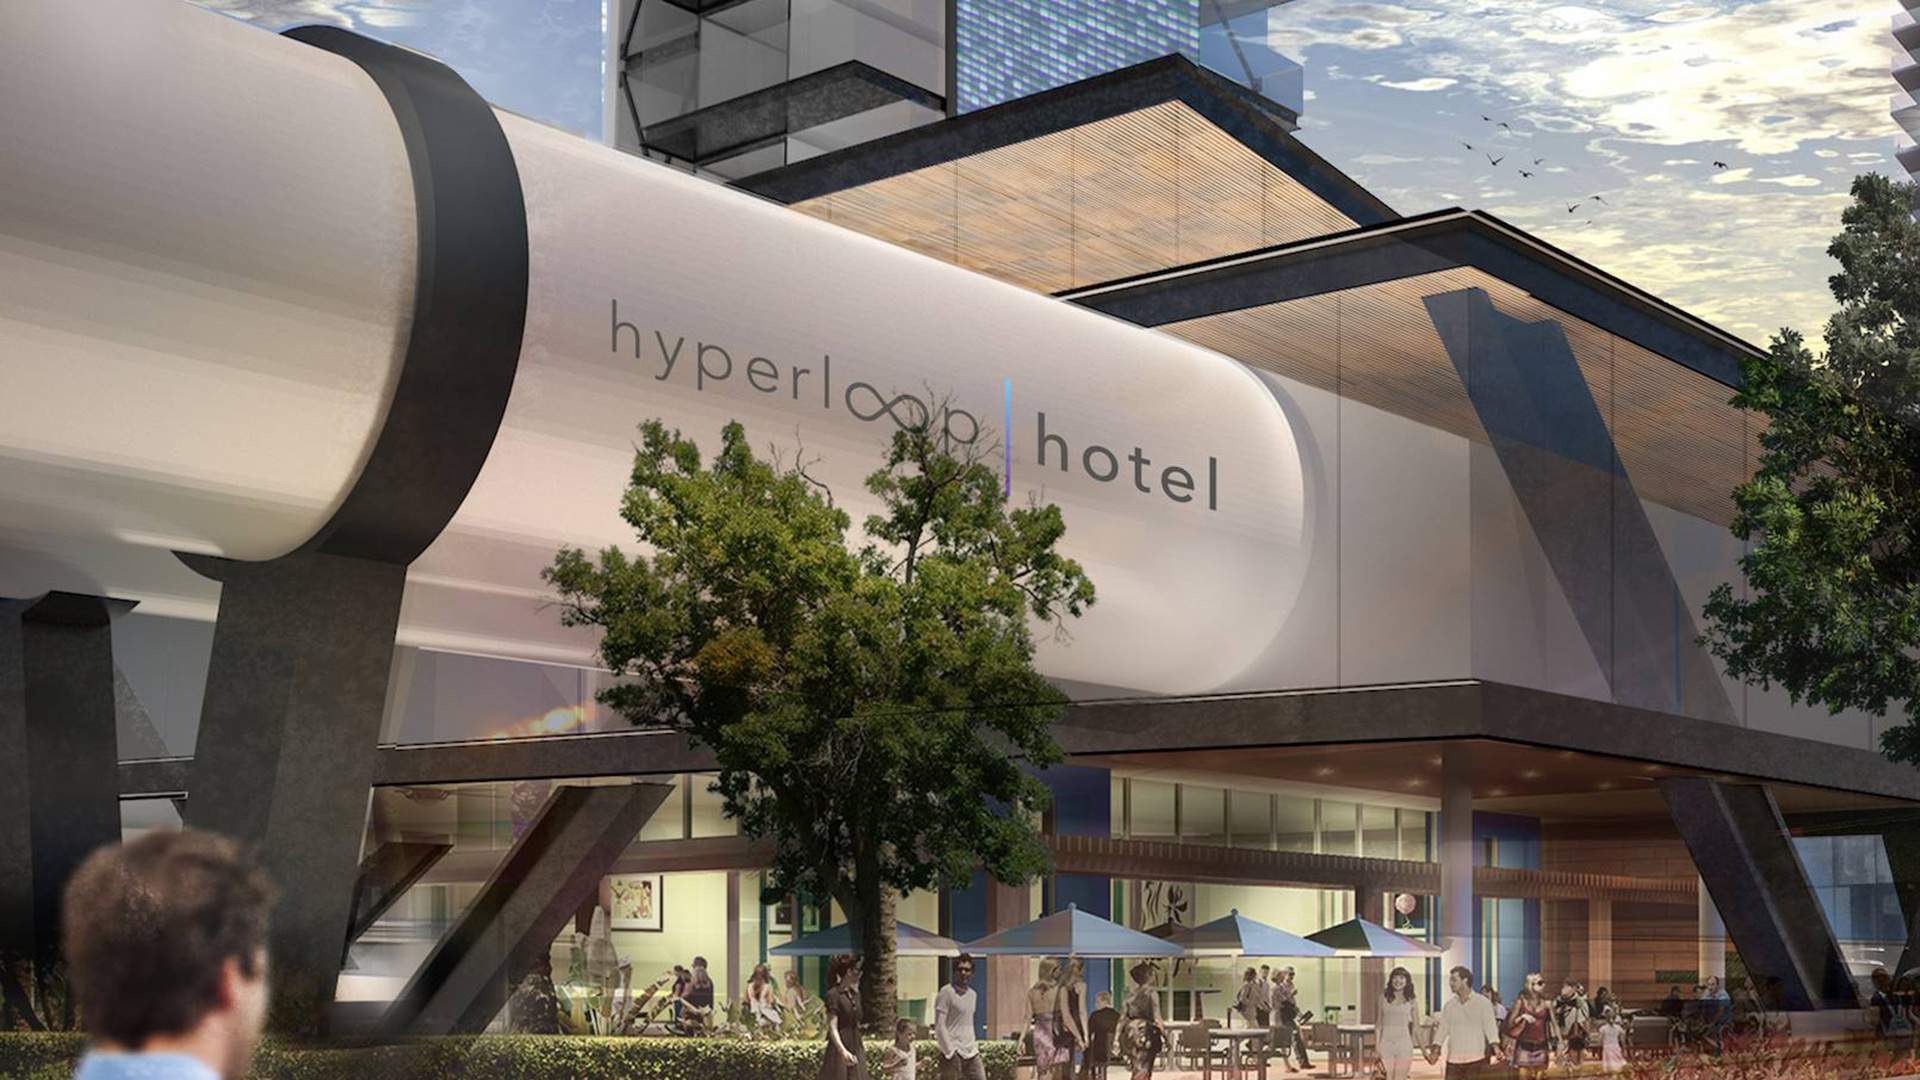 This Elon Musk-Inspired High-Speed Hotel Could Casually Zoom Between Cities